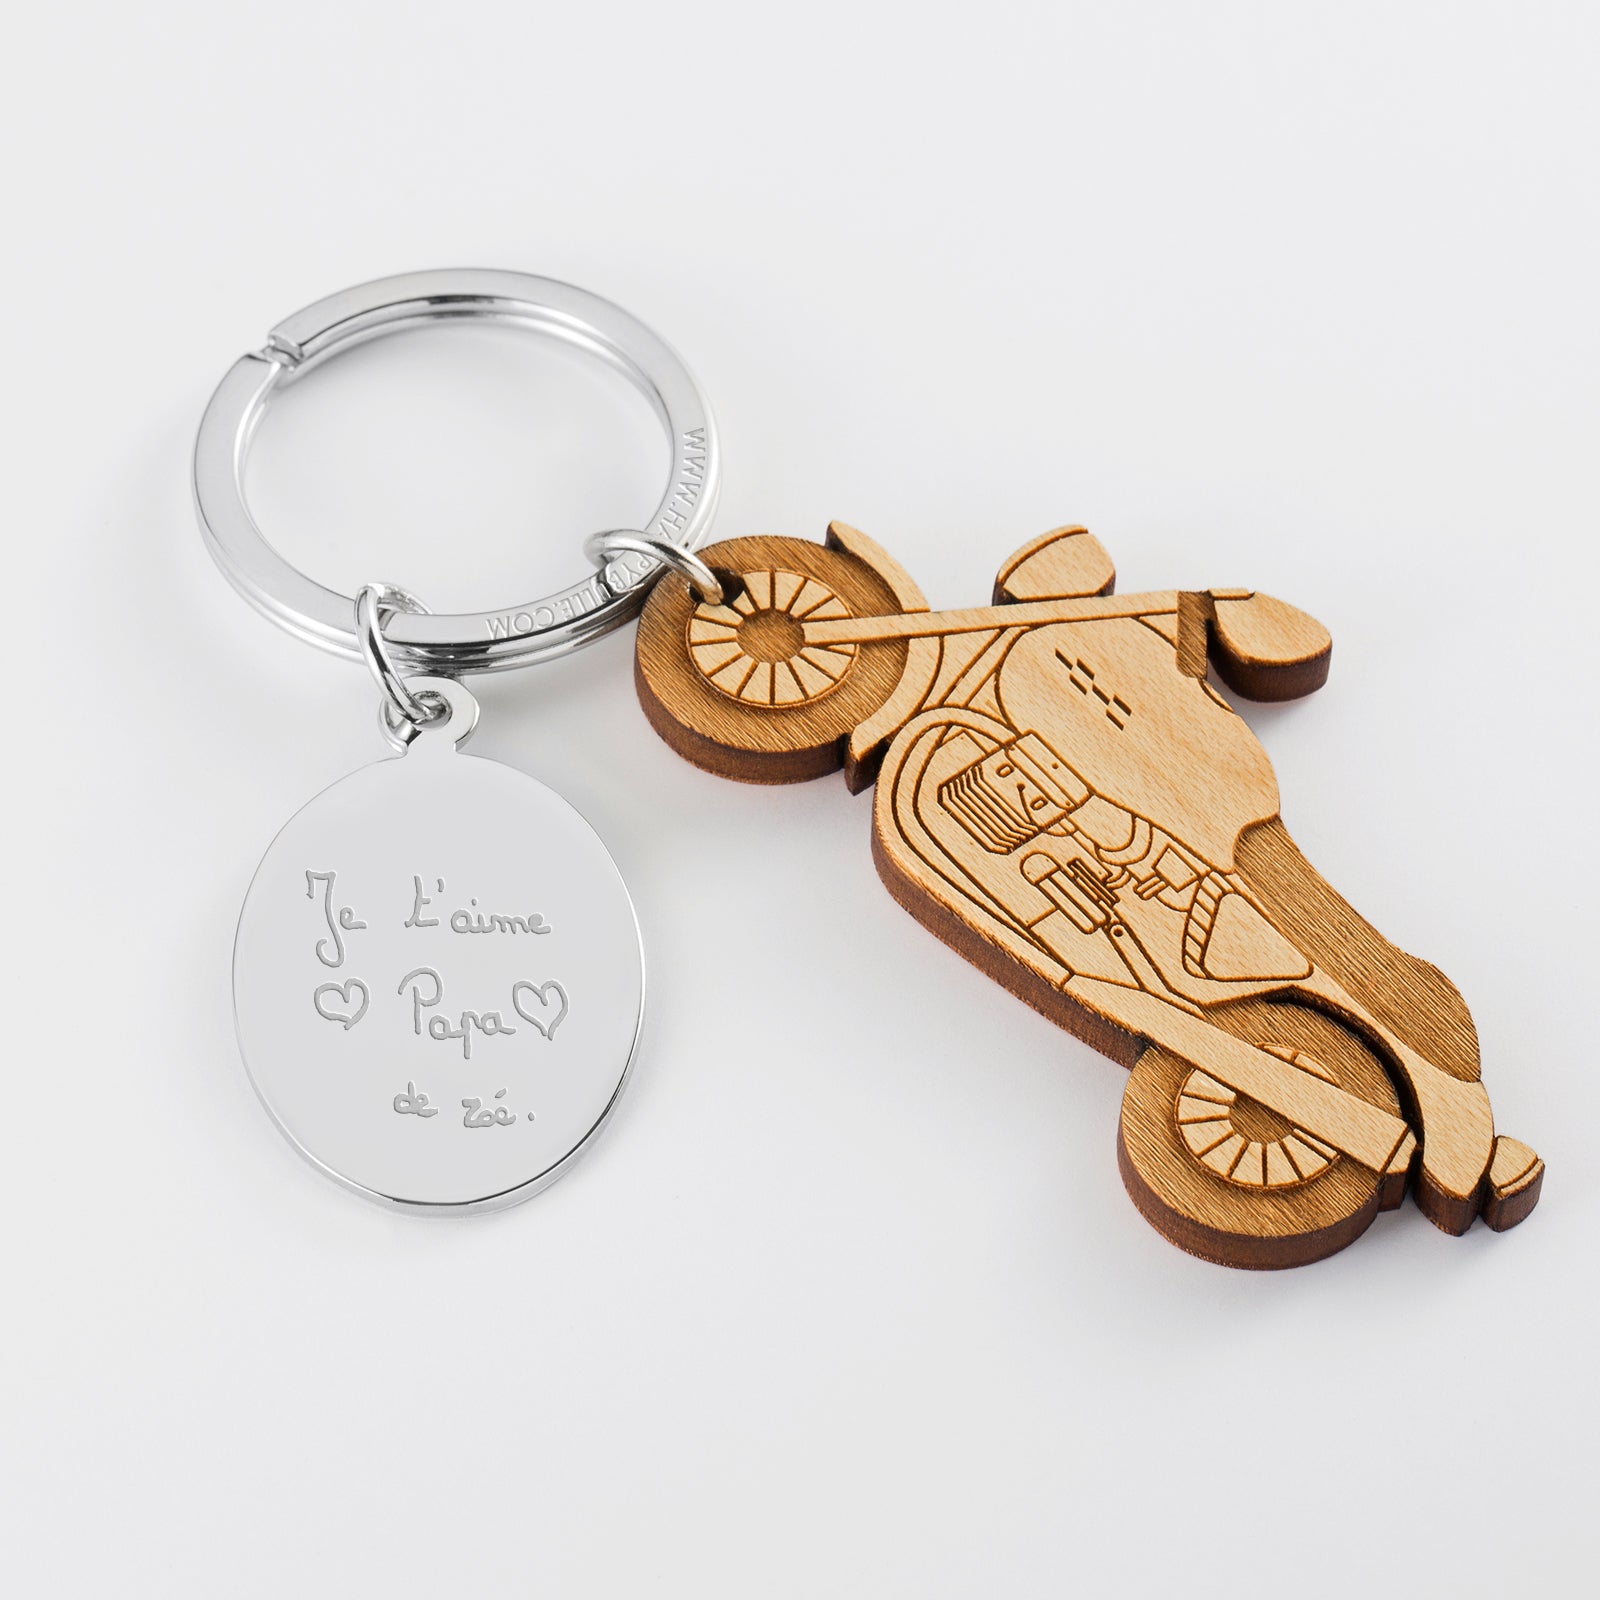 Personal touch with a wooden engraved motorbike keychain